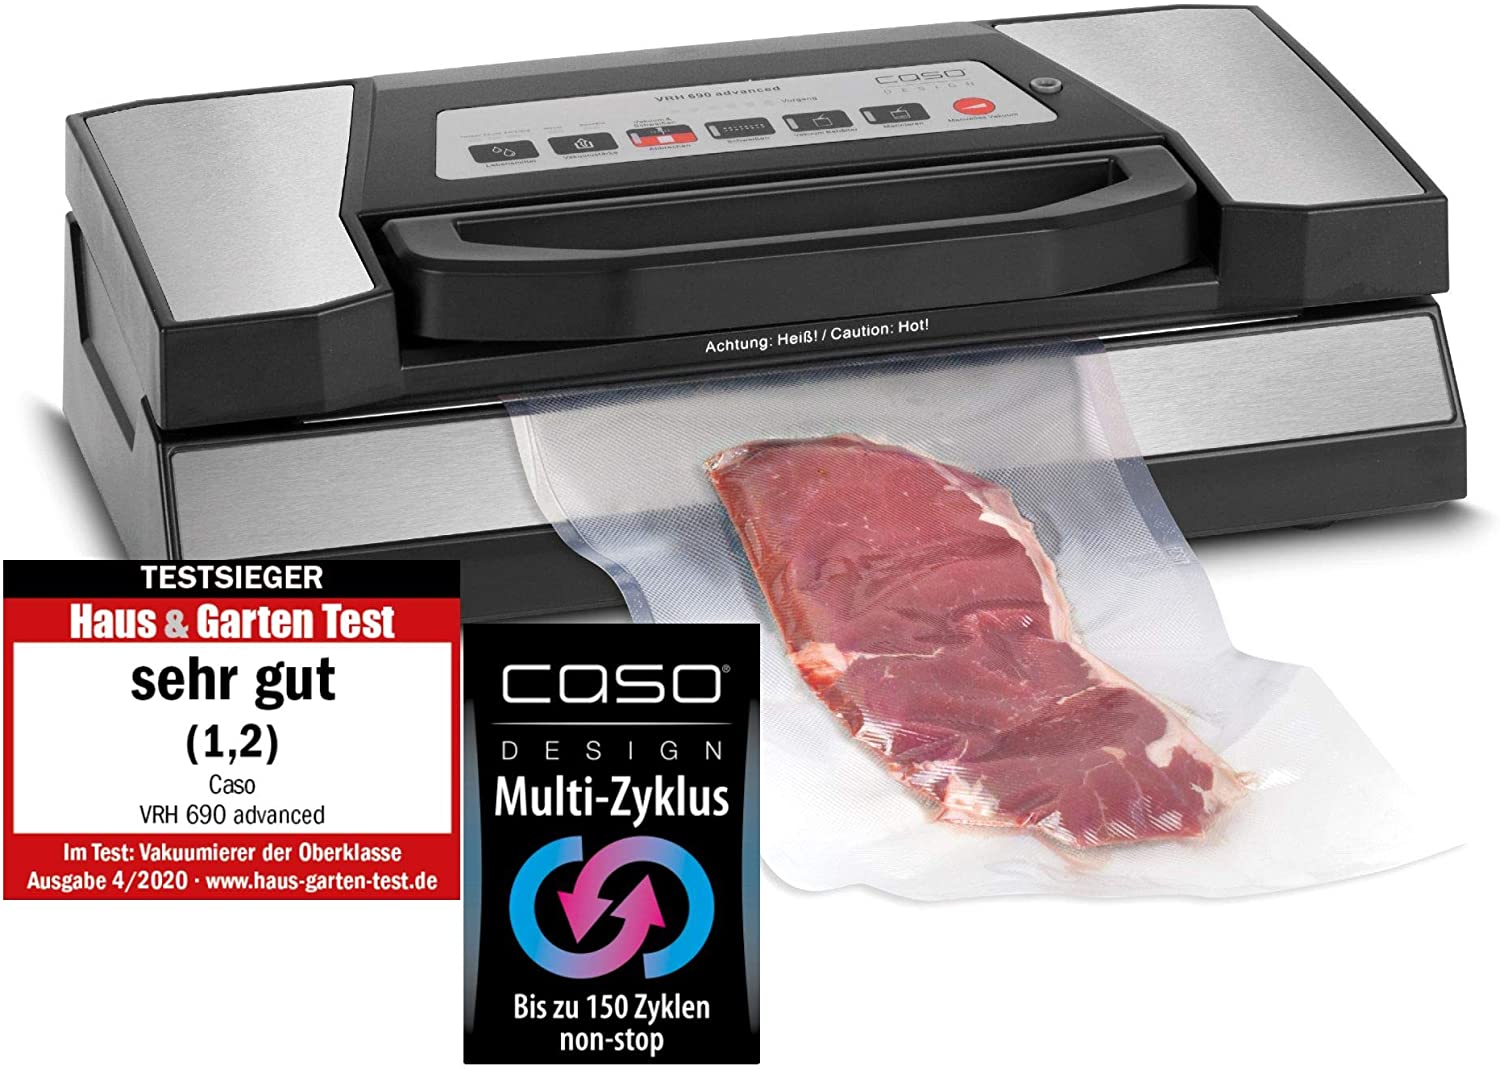 CASO Advanced Vacuum Sealer - Film Sealing Device - Extend the Shelf Life of Your Food - Ideal For Portioning and Storing Food